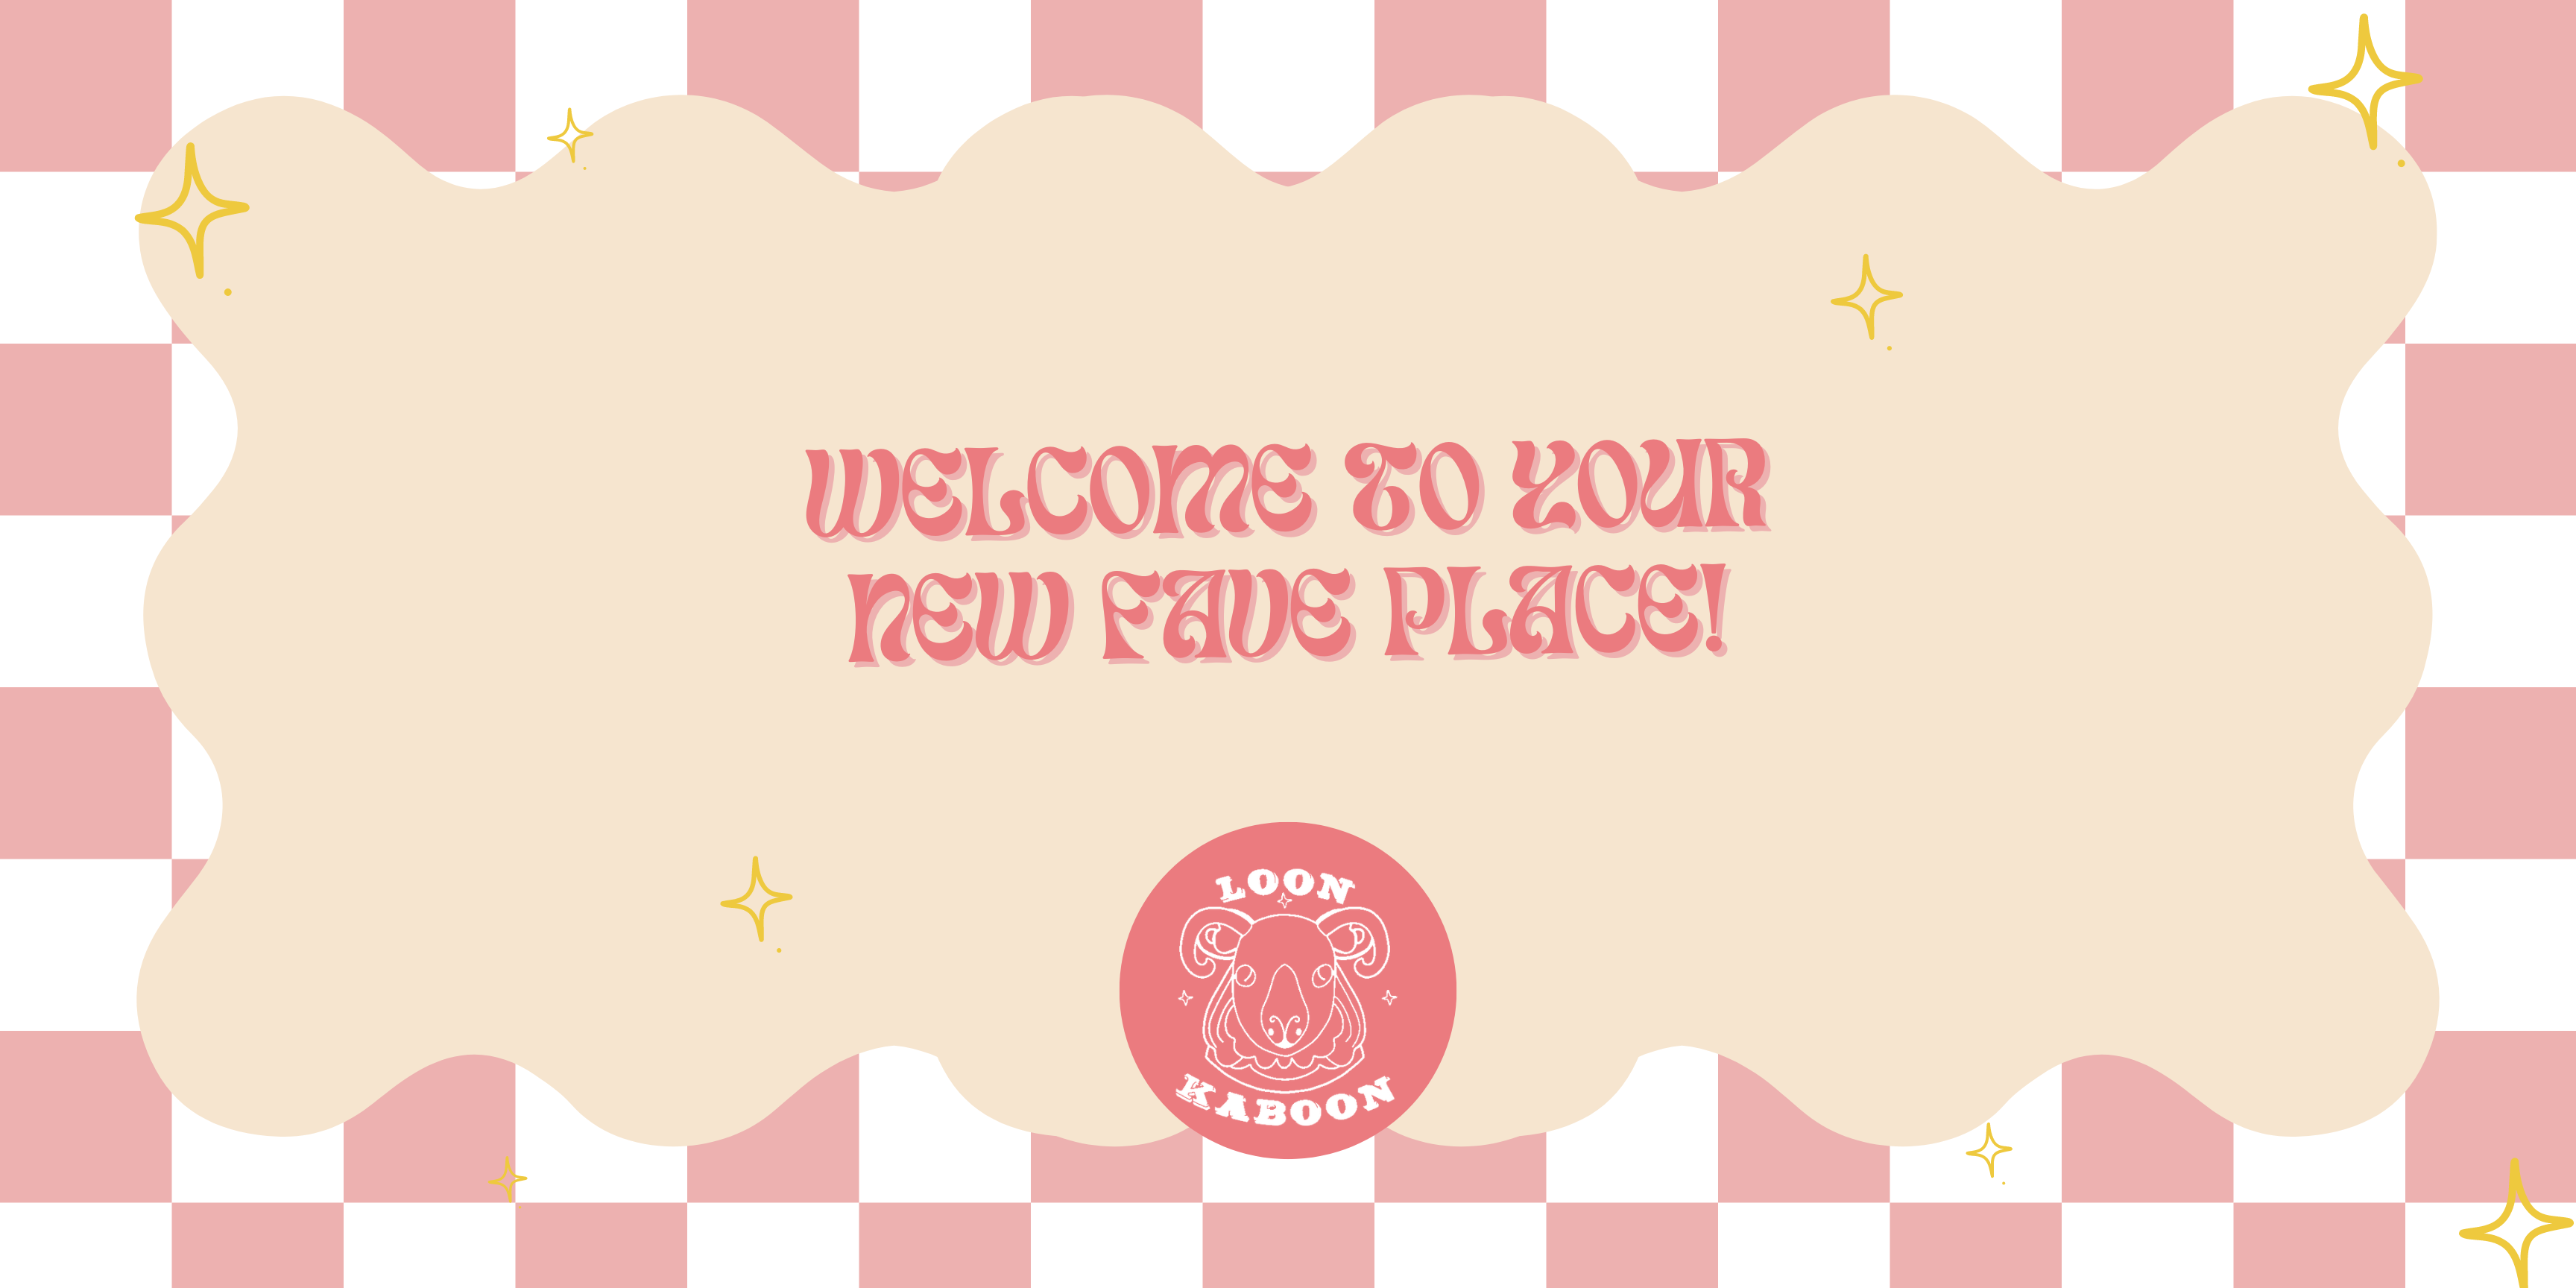 Banner image with checkered light pink and white background and 'welcome to your new fave place' wording.